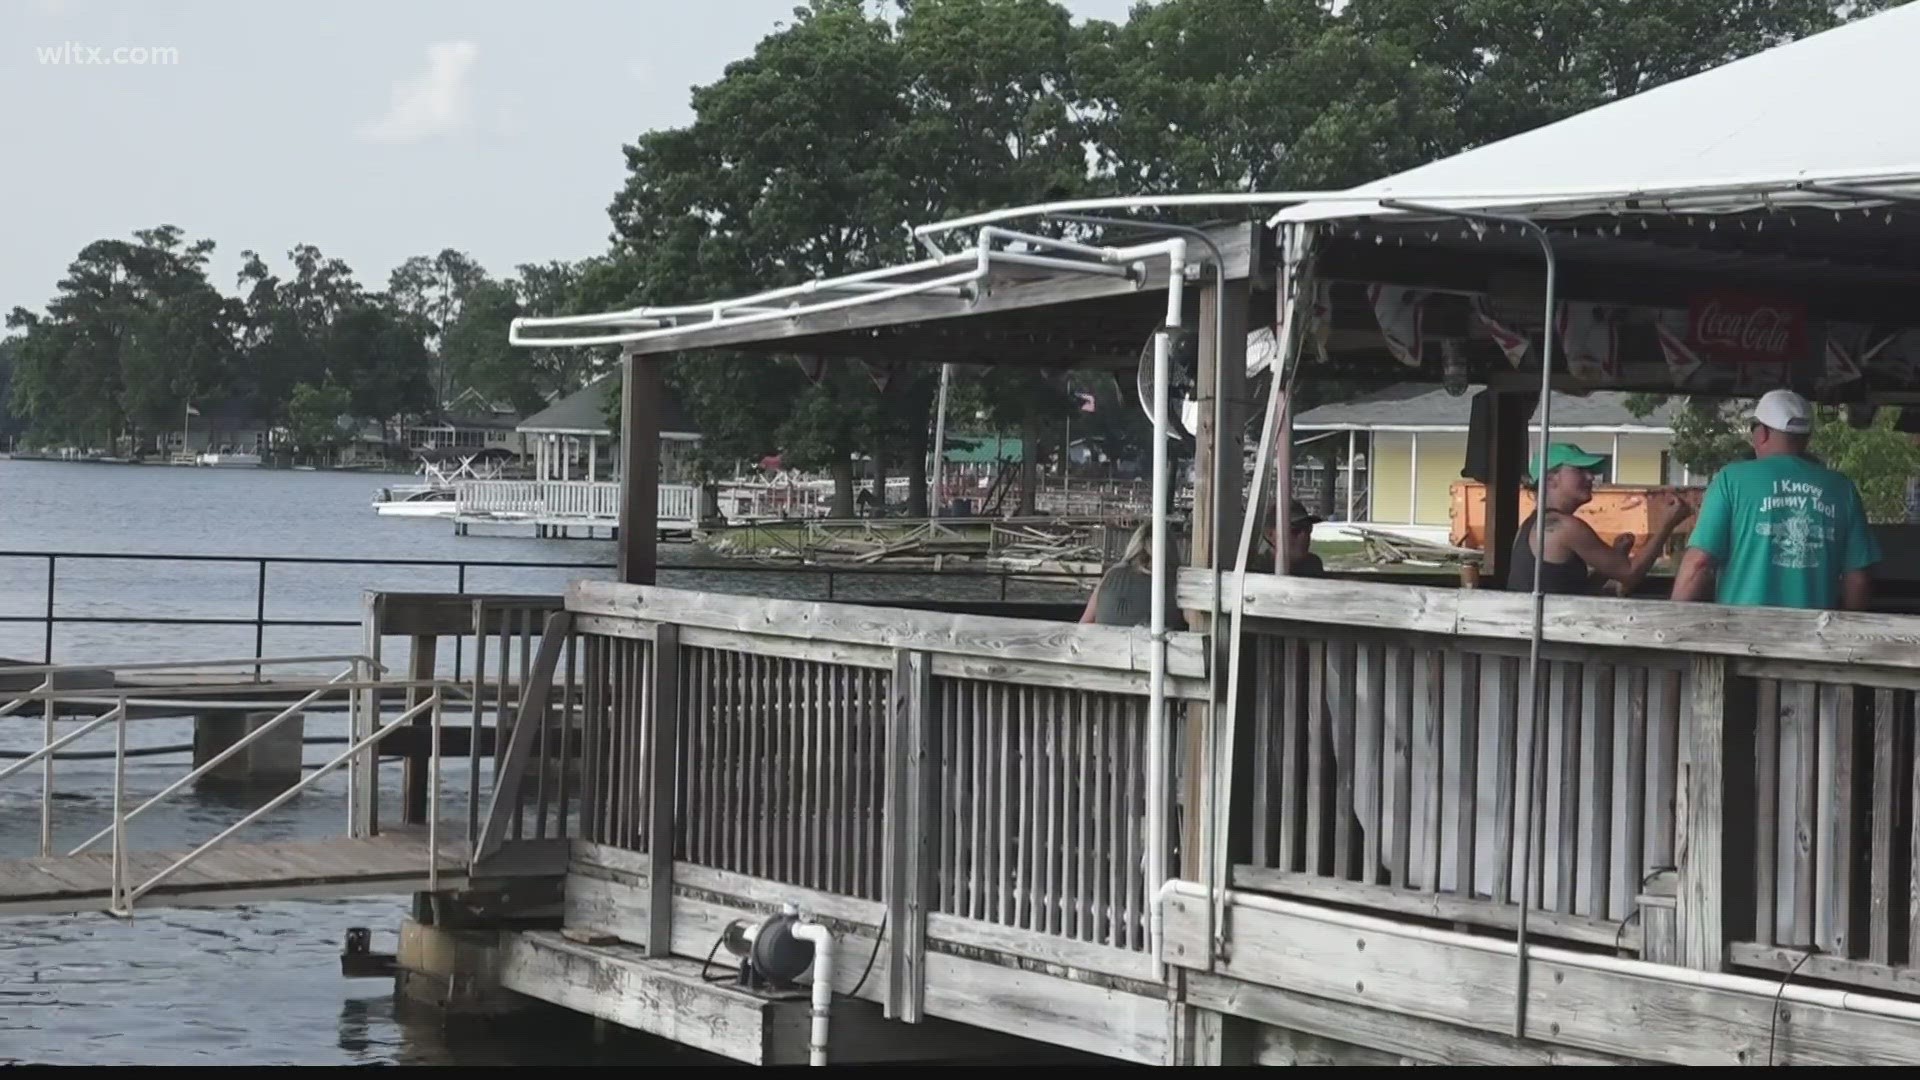 The old Buffalo Creek Marina will become Martin's Landing with new docks, a place to get gas, a new Mexican restaurant, and revamped cabins, as well.